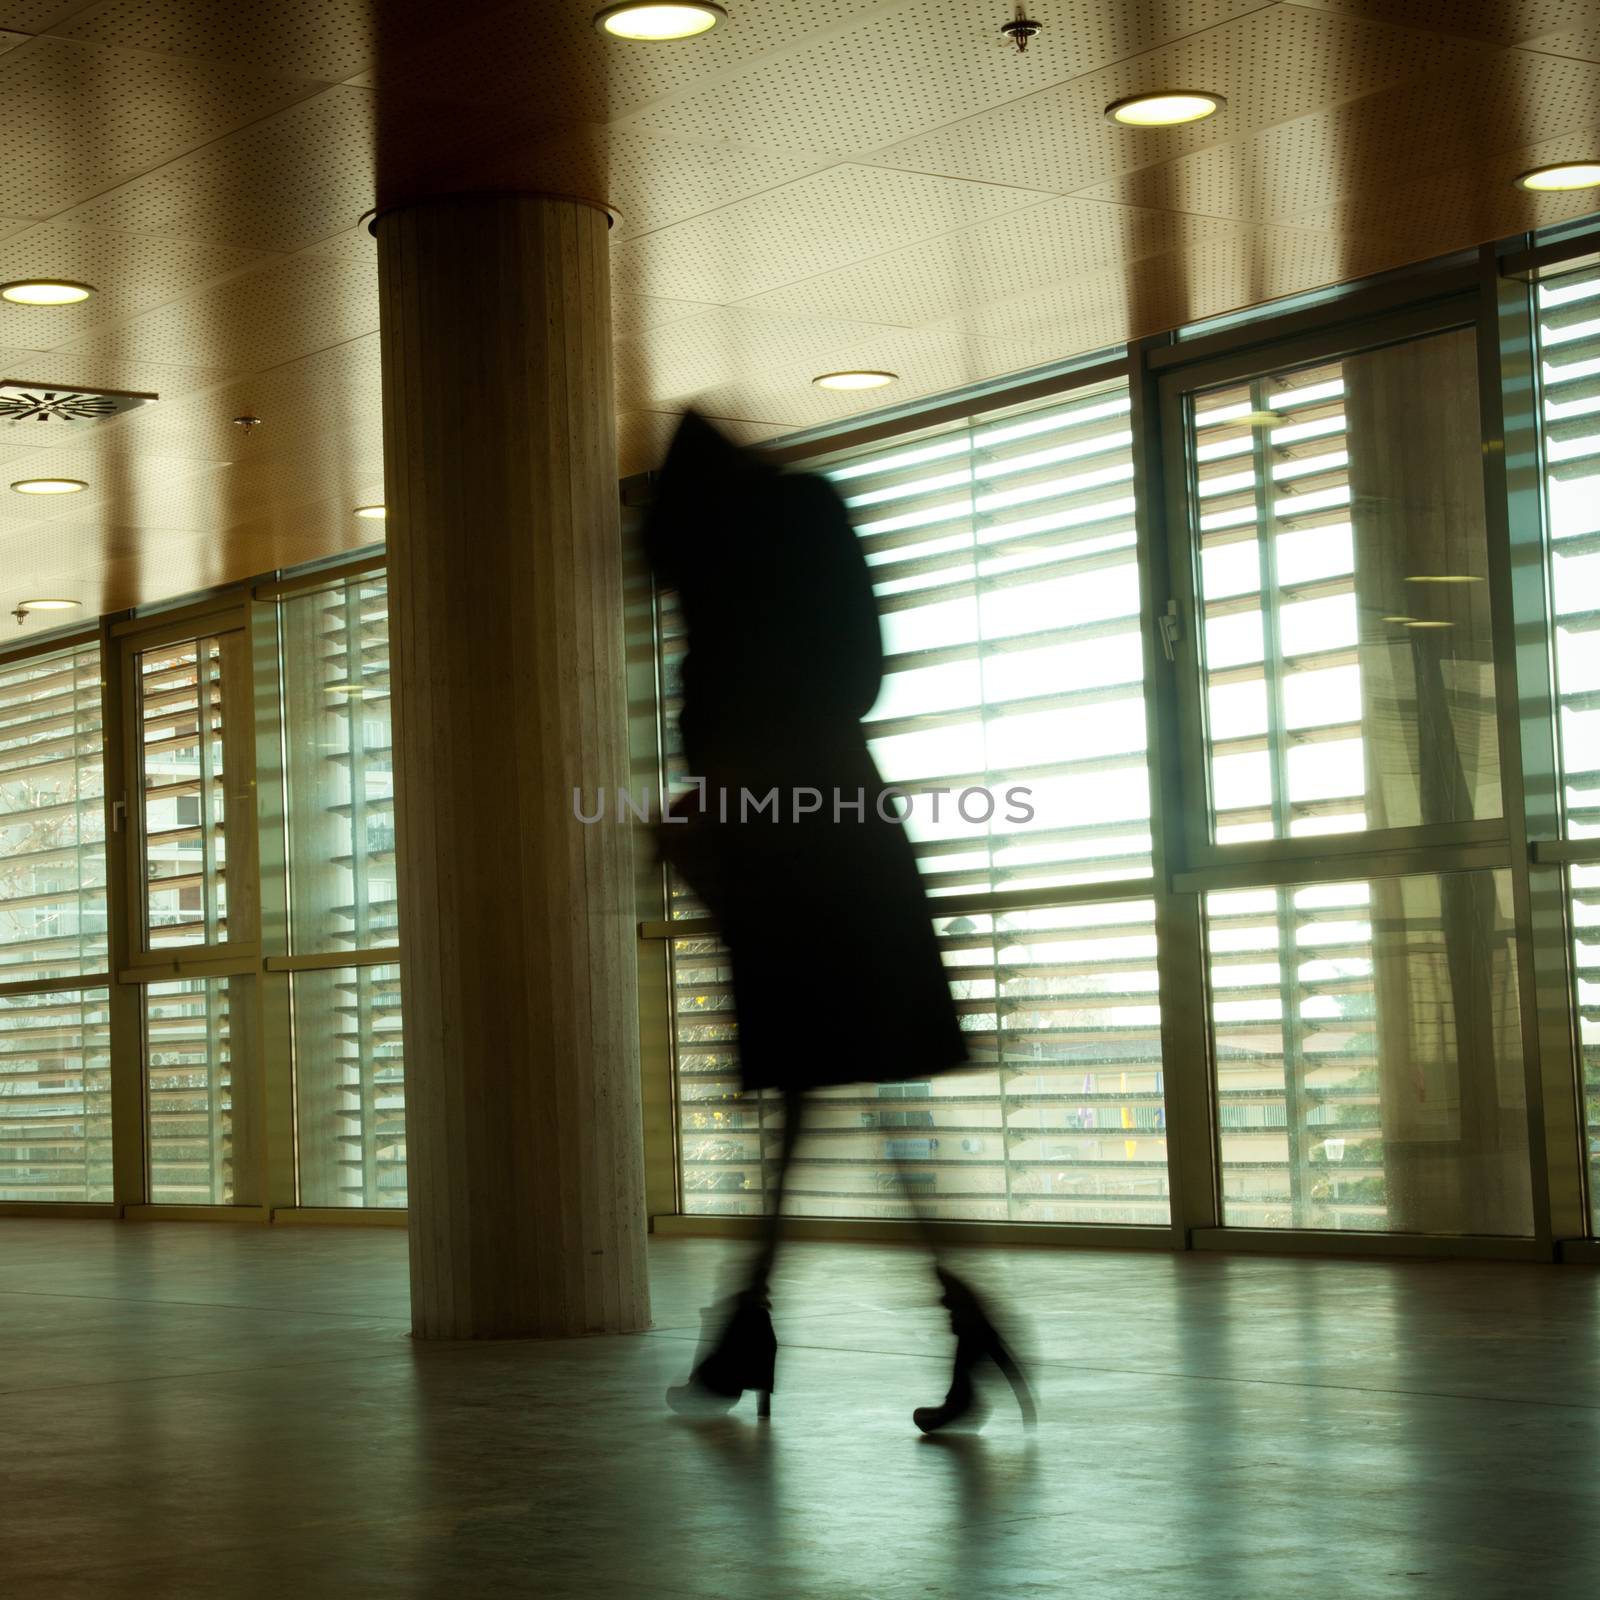 Intentional motion blurred image of a business people group walking in office lobby. All exposed faces are motion blurred.